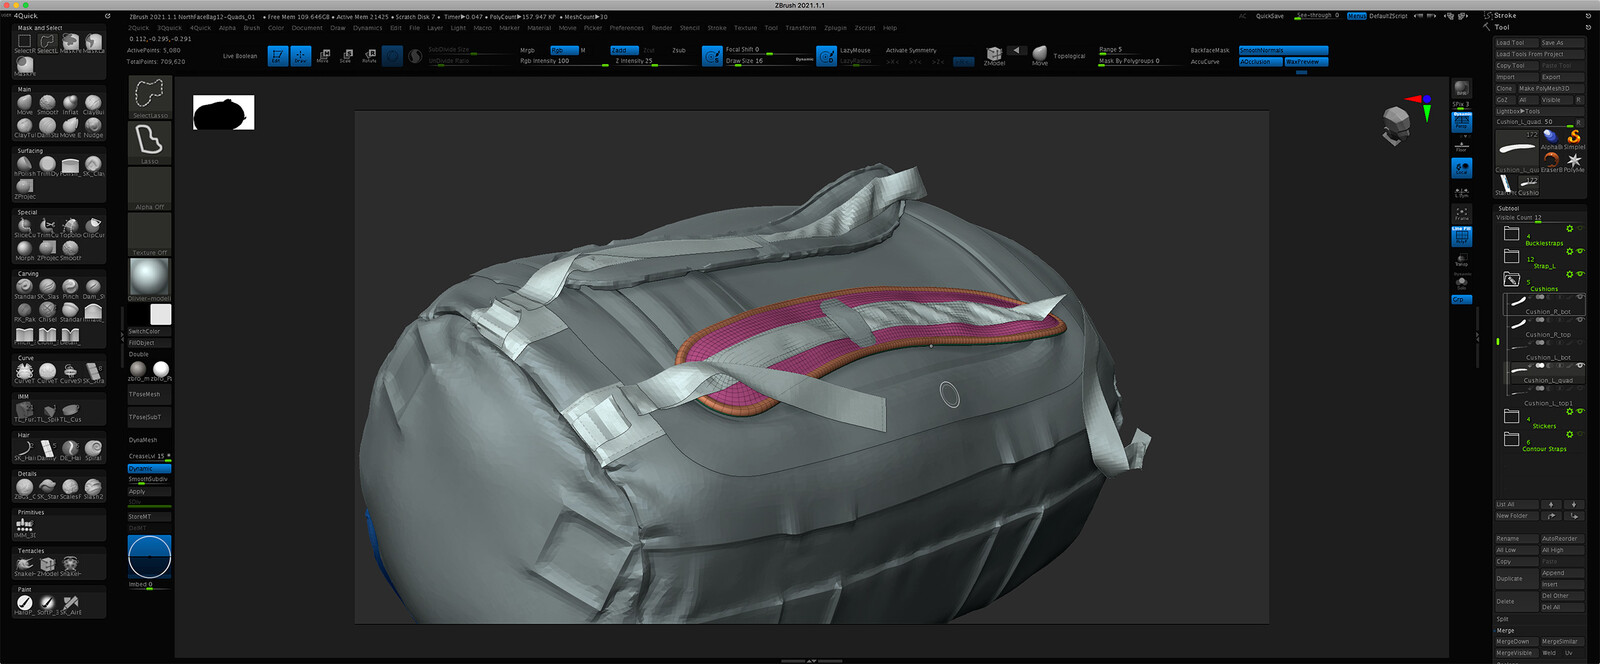 Despite Marvelous ability to export quads, many pieces have to be repologized and re-UVed in Zbrush. Check the difference between the cushion shoulder straps here! I also do quick roundtrips to 3DCoat for UVs.